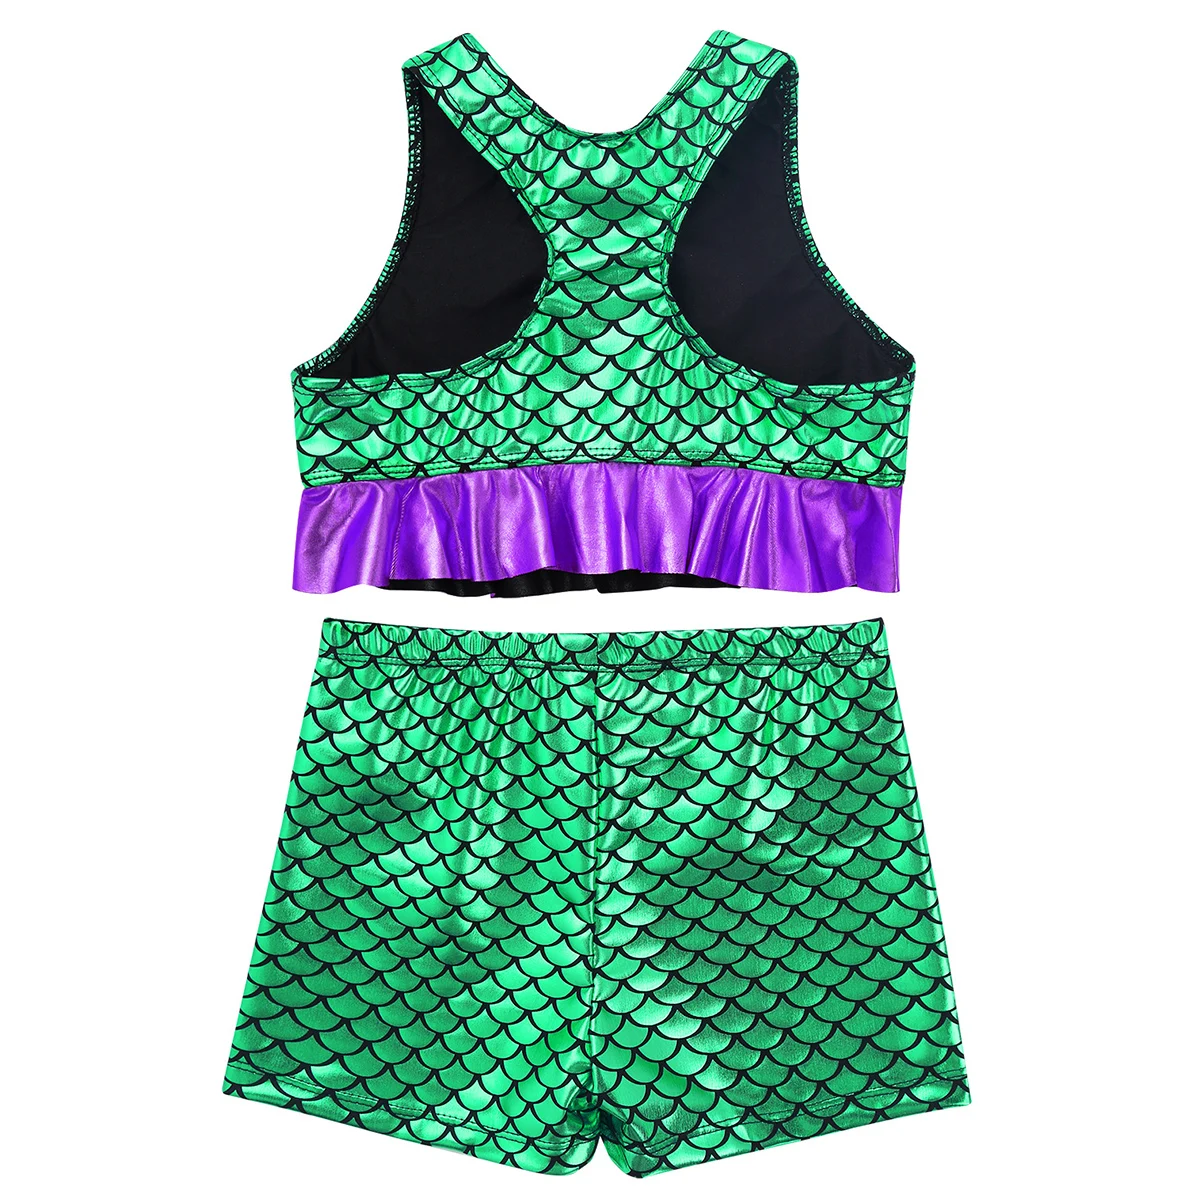 Fish Scales Printed Kids Girls Clothes Set Cute Peplum Crop Tank Top with Shorts Children Dance Gymnastics Cheerleading Outfits images - 6